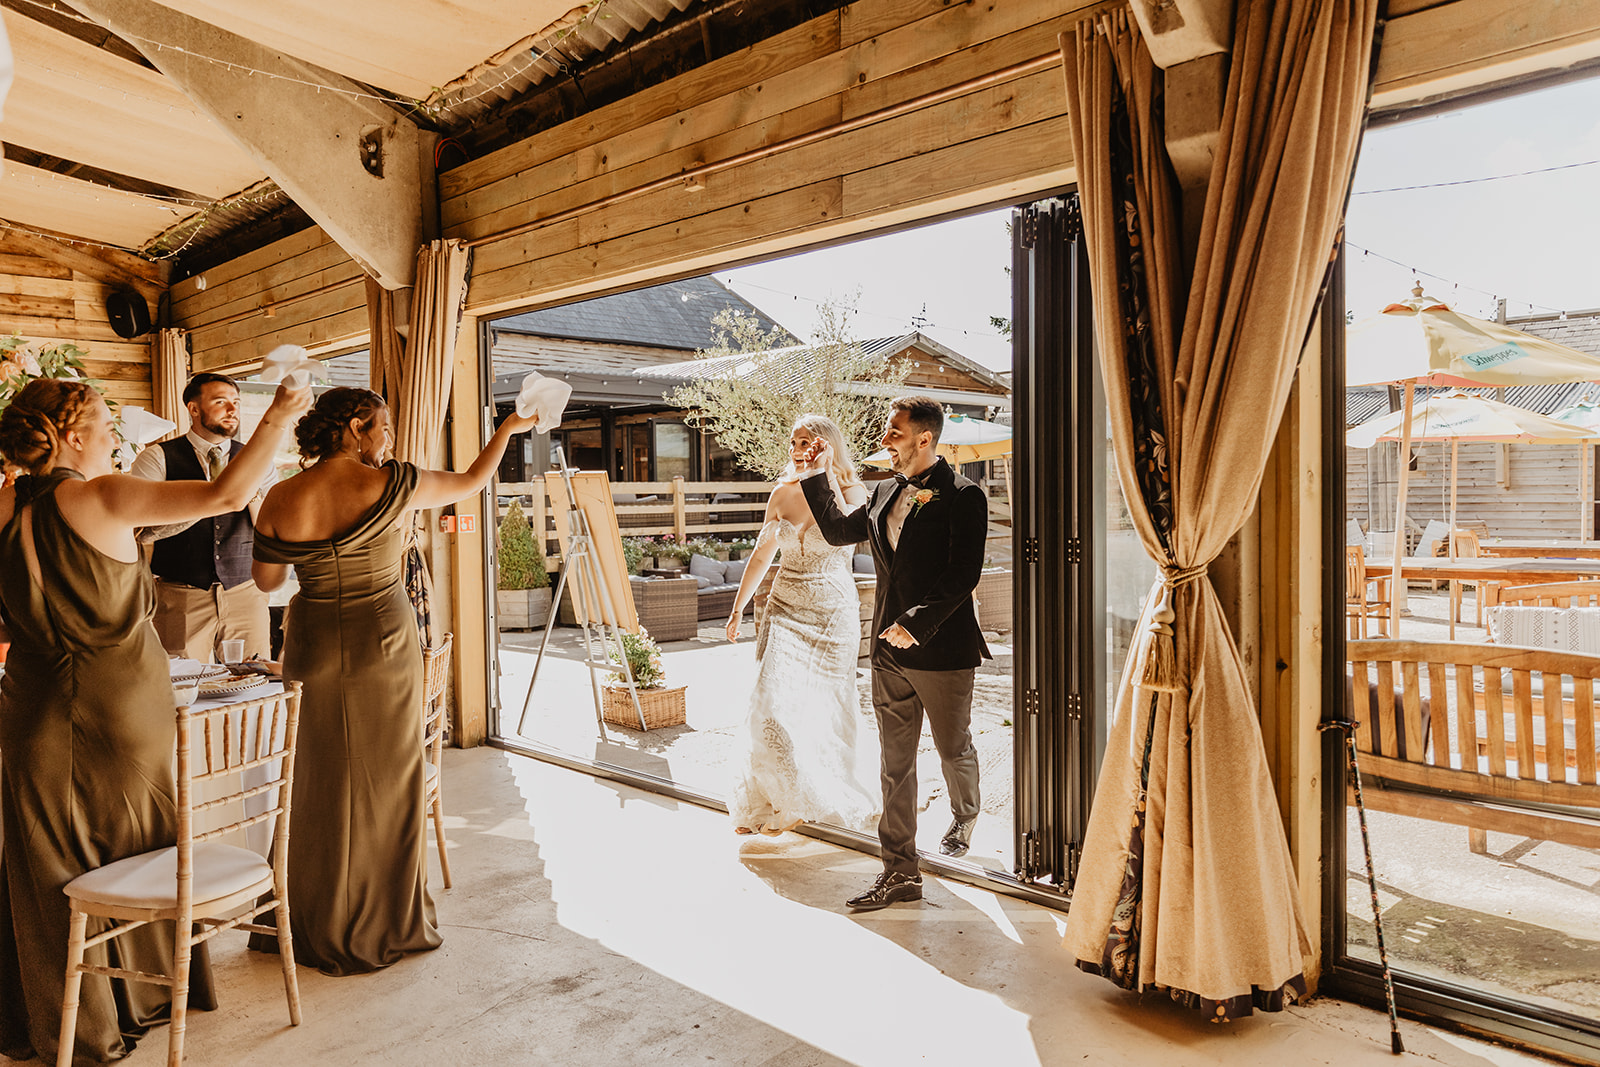 Bride and groom arriving at reception at a Southlands barn wedding, Sussex. Photo by OliveJoy Photography.